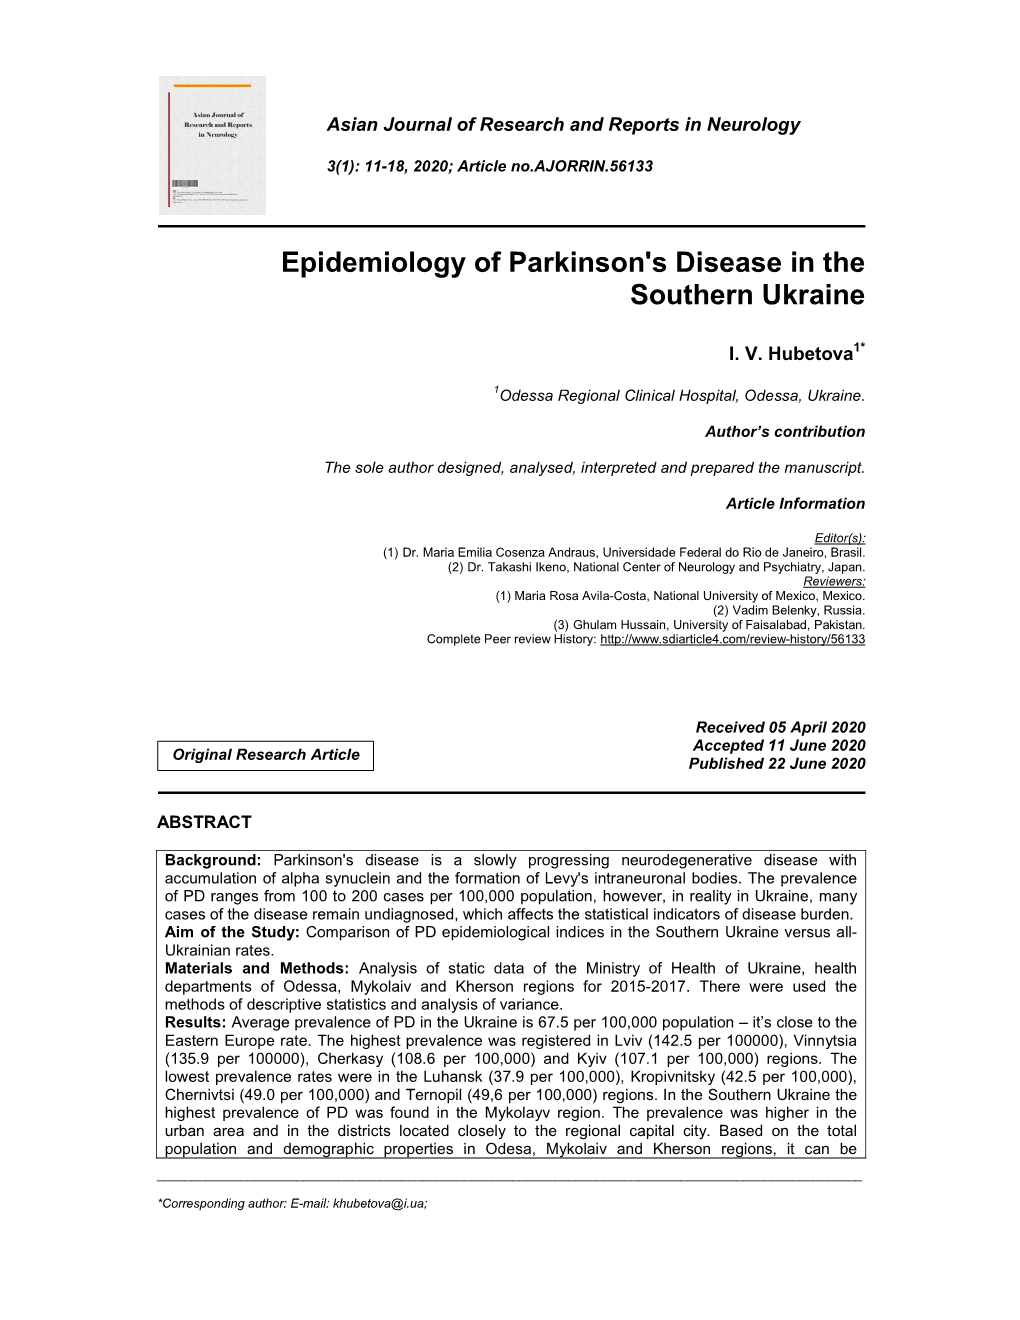 Epidemiology of Parkinson's Disease in the Southern Ukraine